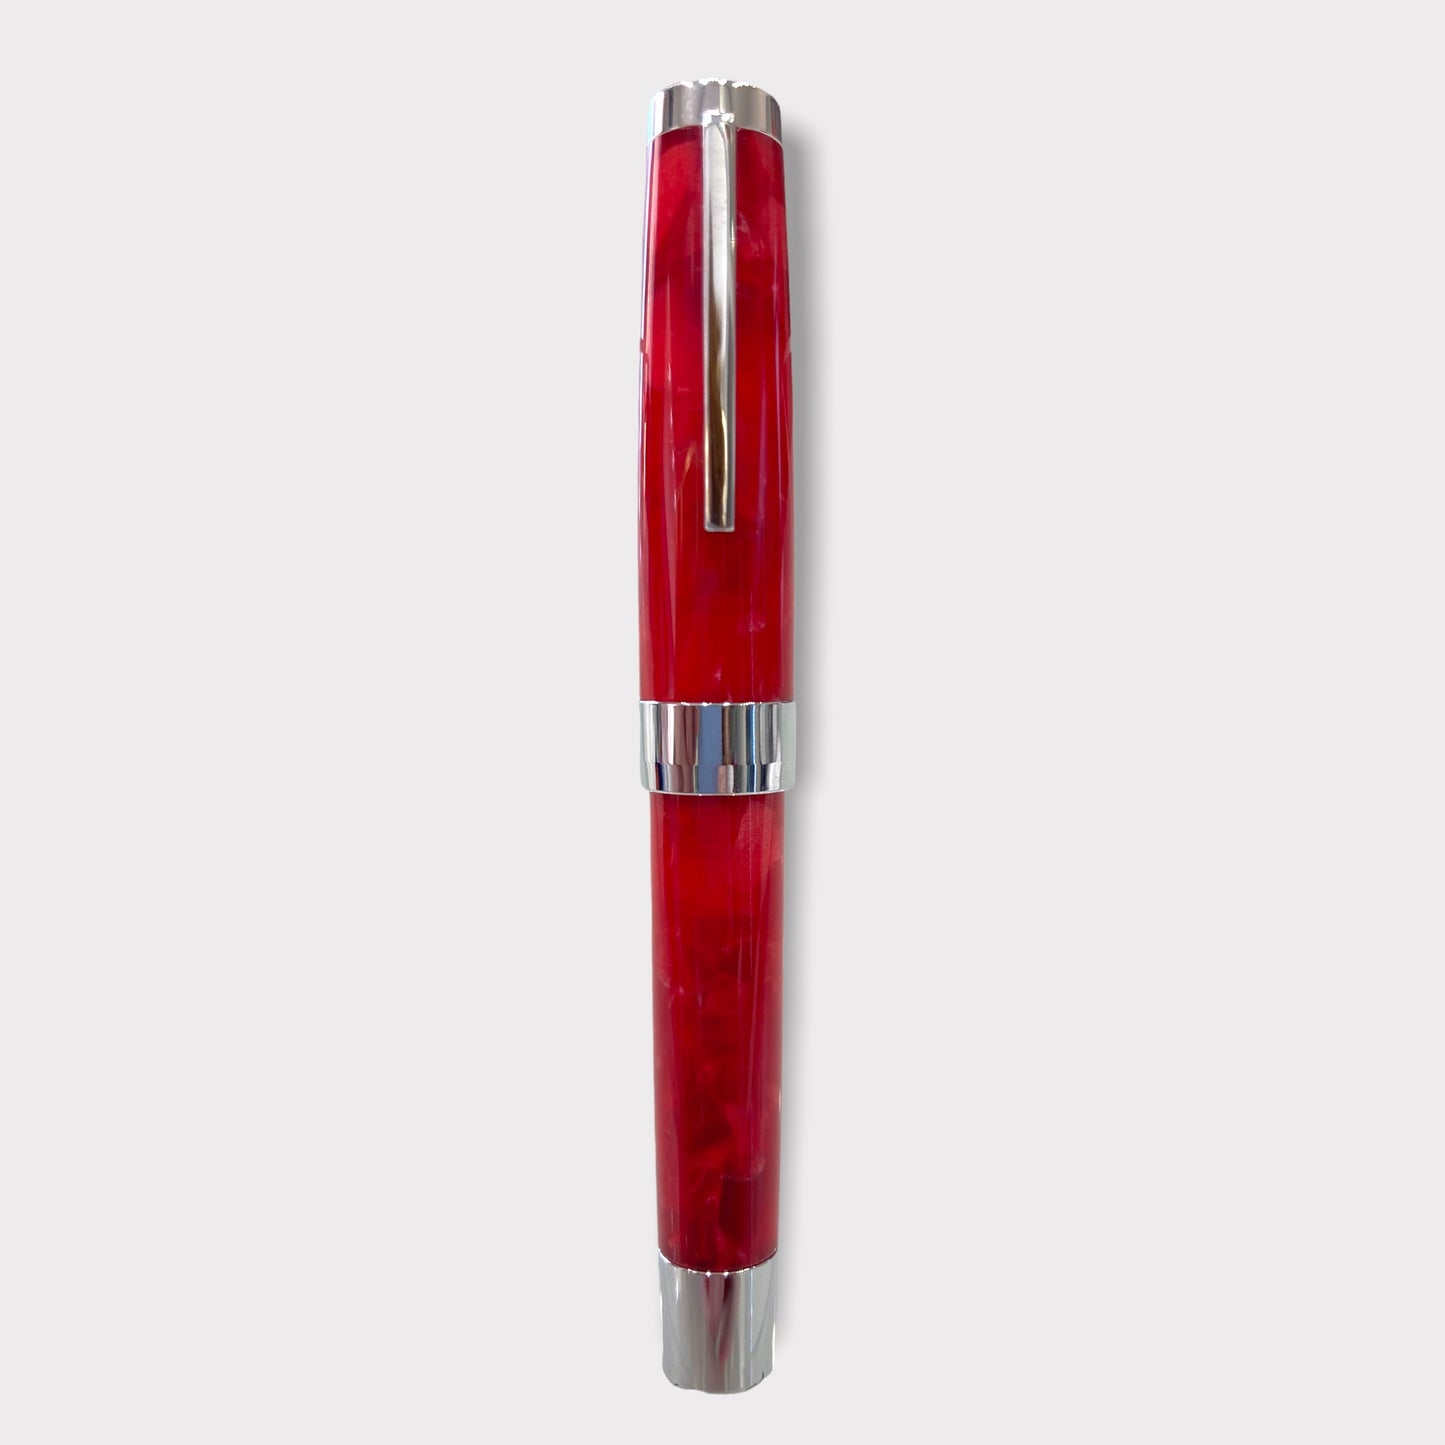 Mini Fountainpen Marbled Red